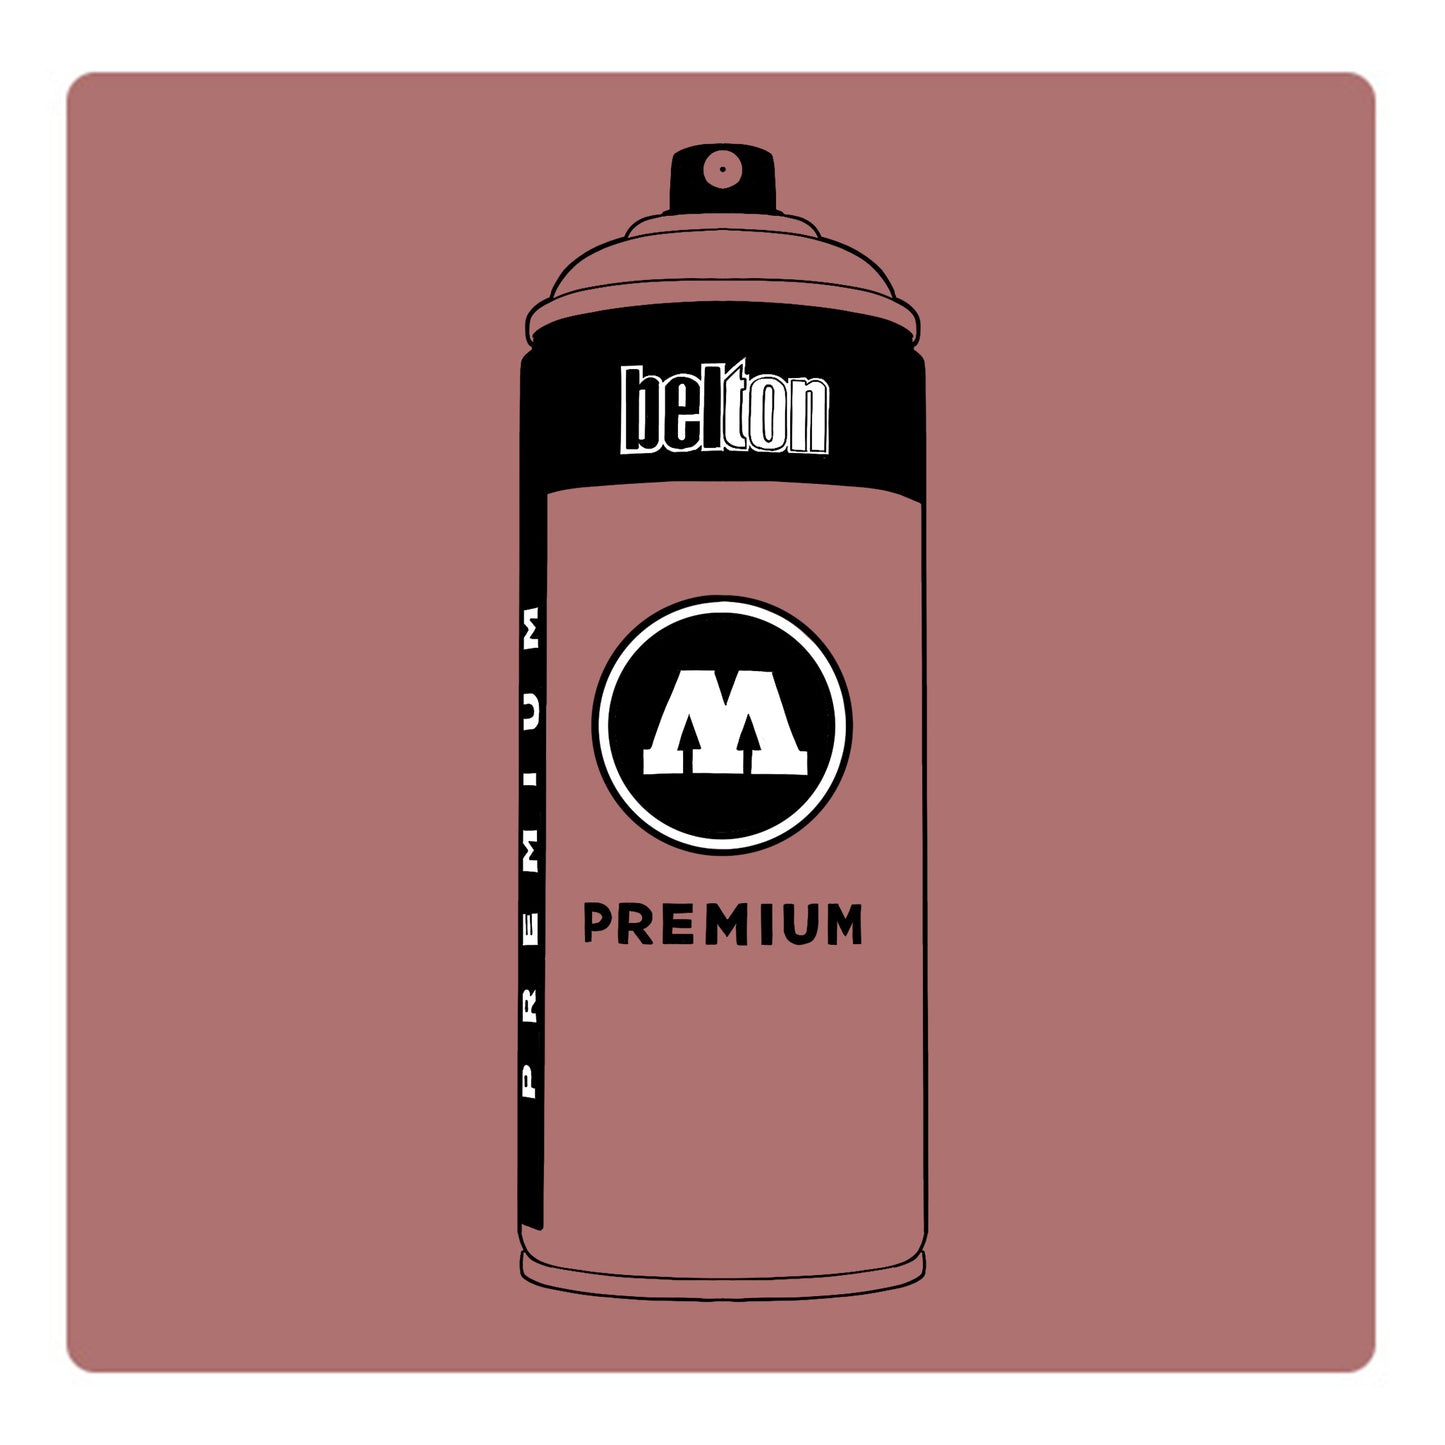 A black outline drawing of a dark pastel pink spray paint can with the words "belton","premium" and the letter"M" written on the face in black and white font. The background is a color swatch of the same dark pastel pink with a white border